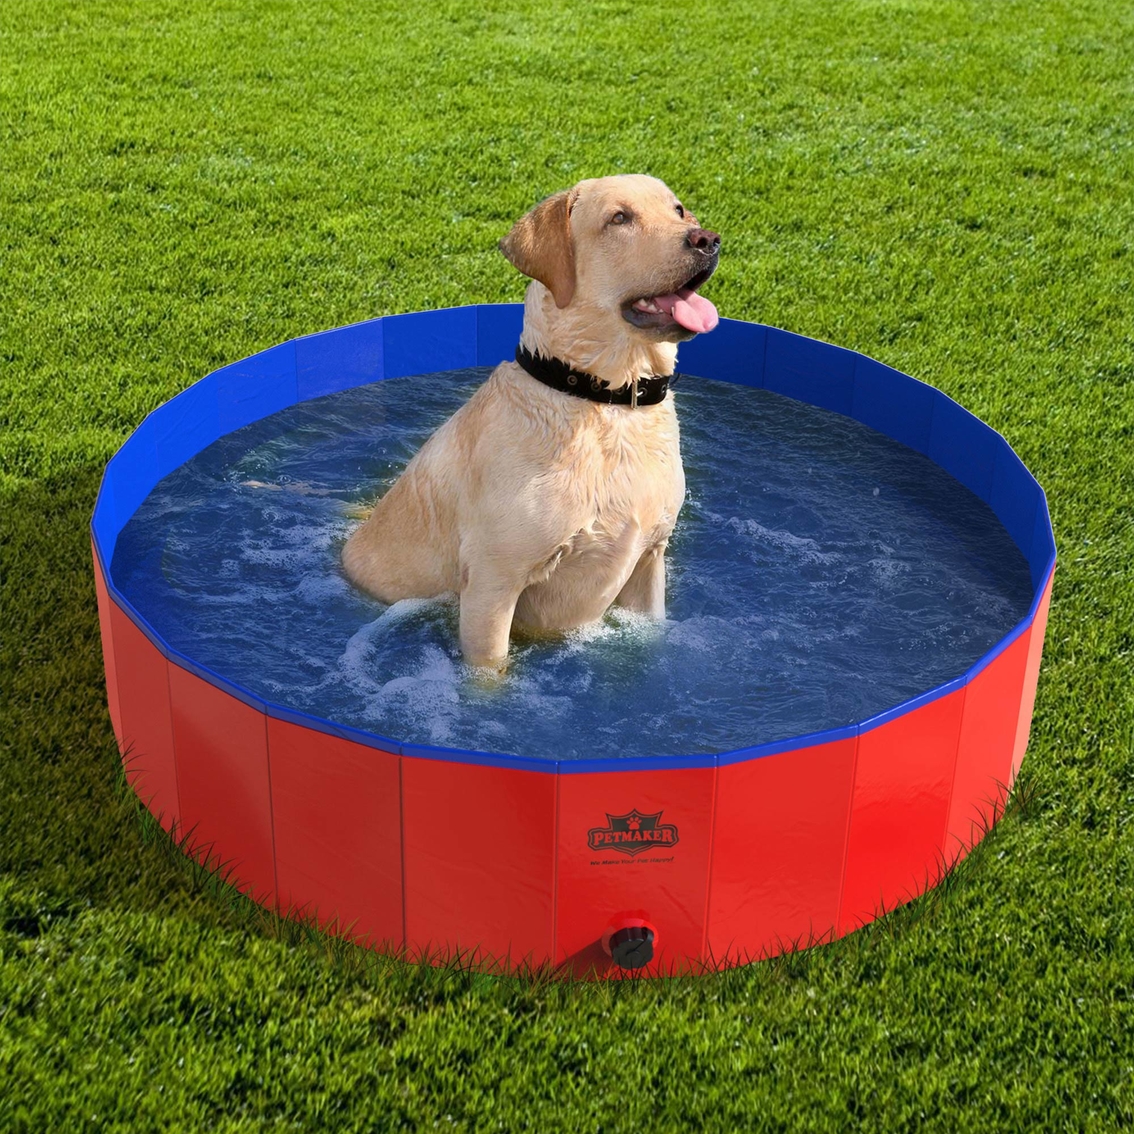 Petmaker Collapsible Pet Dog Pool and Bathing Tub - Image 2 of 8